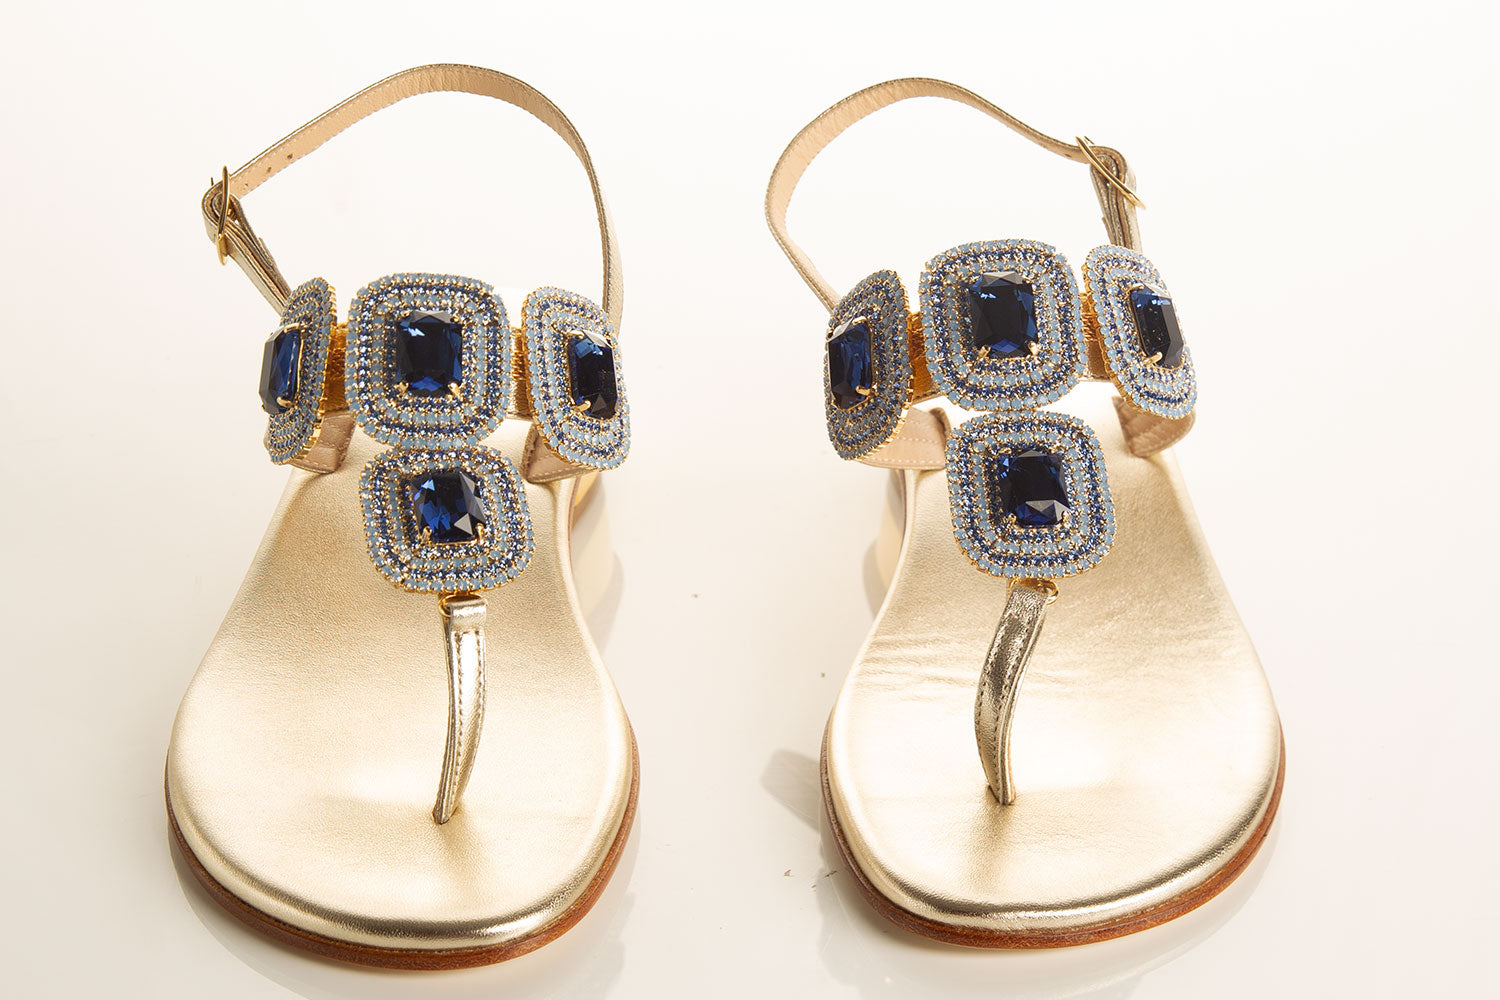 blue sandals with gold base, jewel sandals with swarovski stones, comfortable heel sandals, high-quality sandals, elegant footwear collection